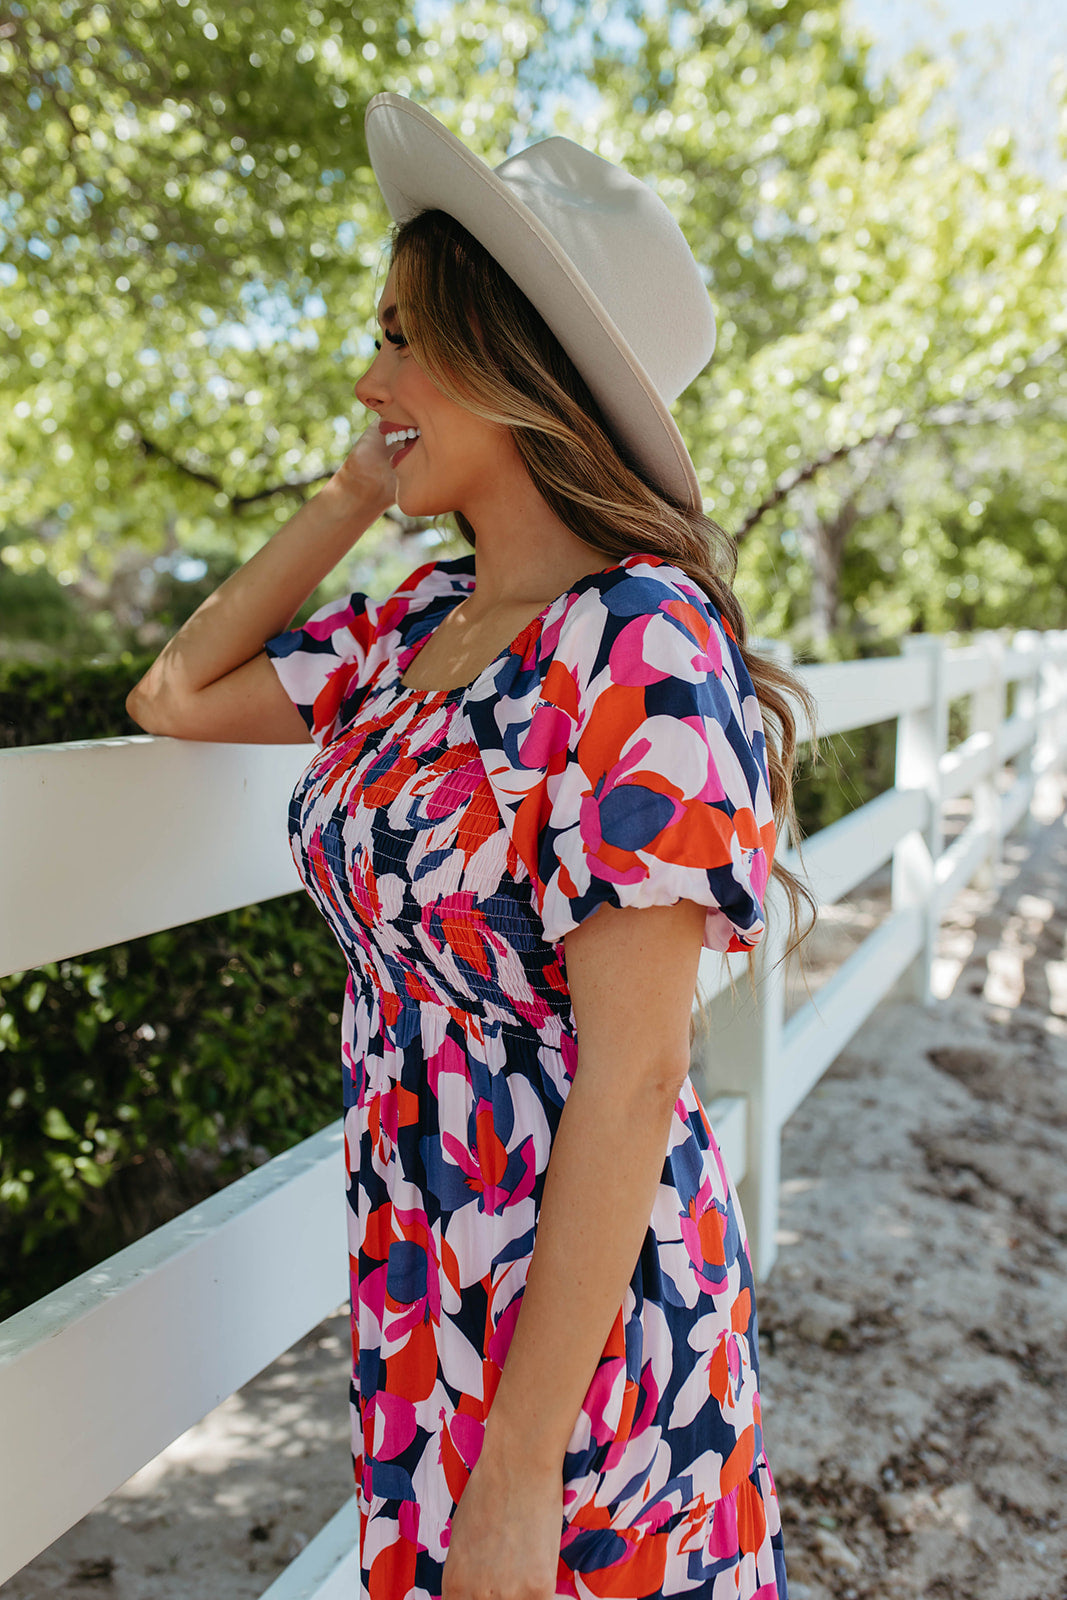 THE MAGNOLIA FLORAL DRESS BY PINK DESERT